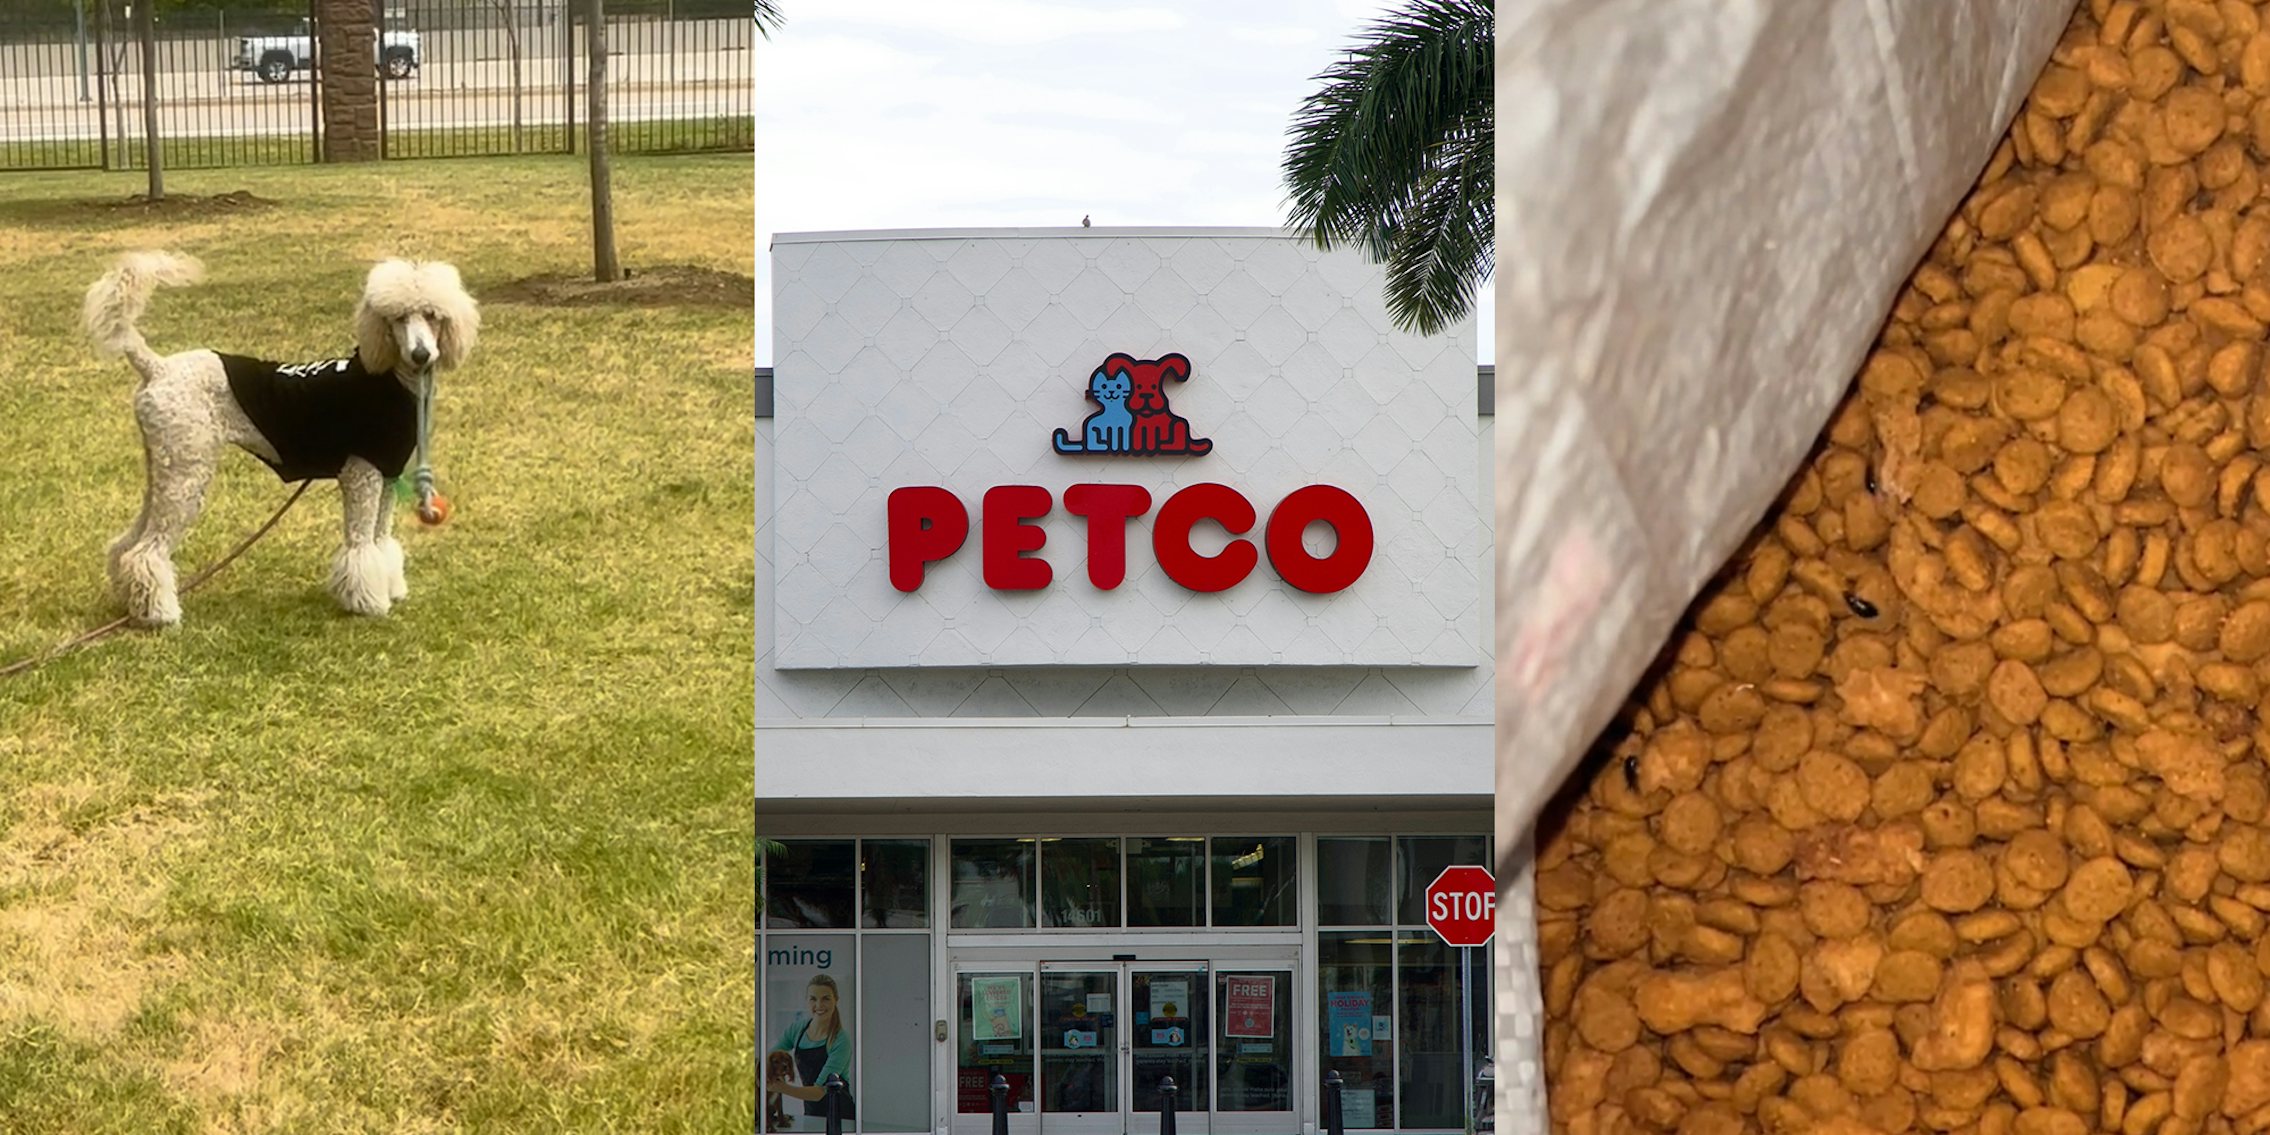 Petco customer says fresh bag of Purina dog food had bugs in it, made her dog sick after one bowl